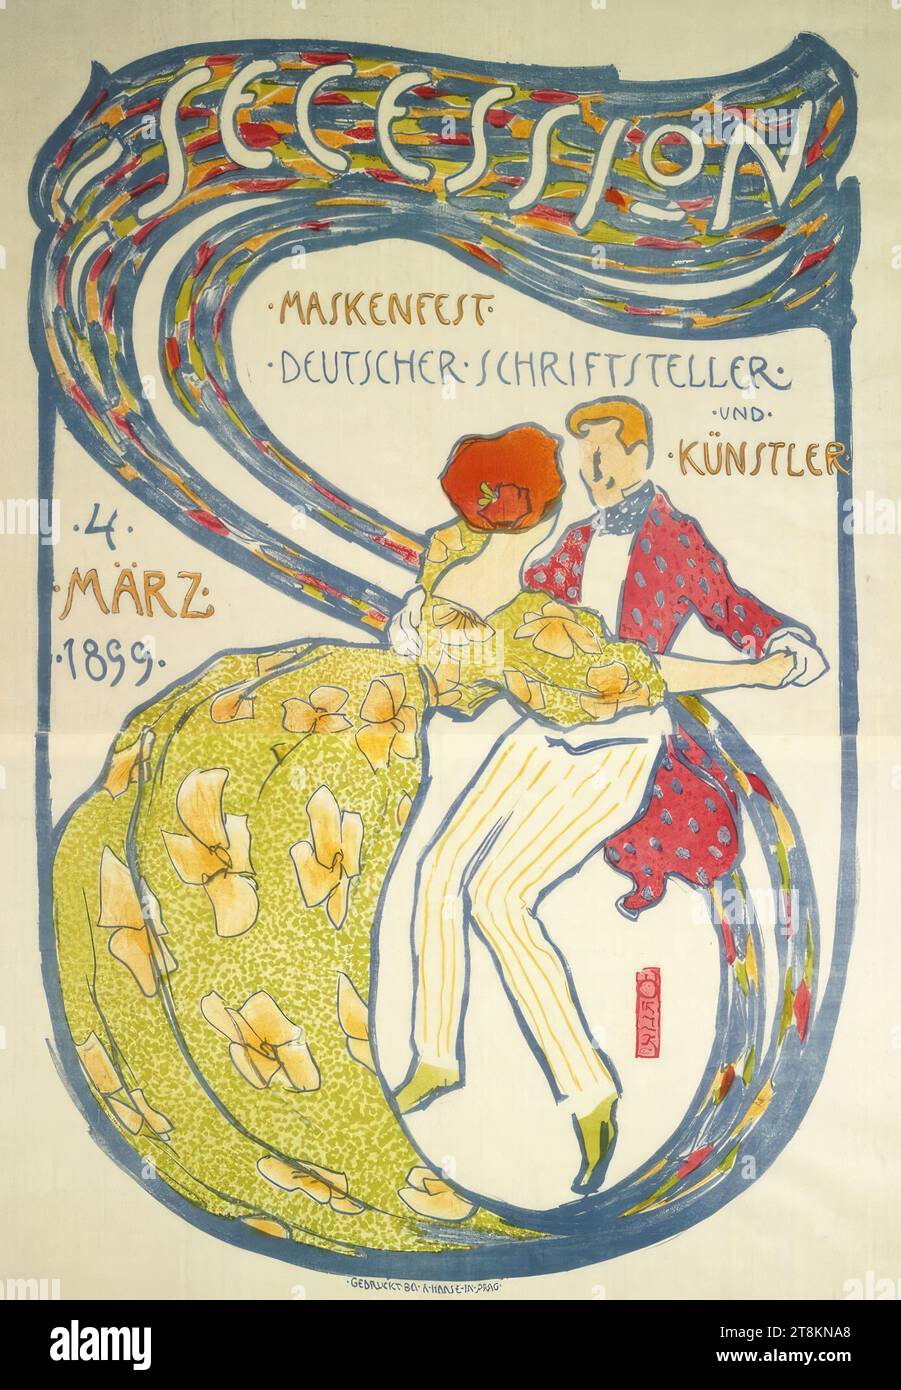 SECESSION; MASK FESTIVAL OF GERMAN WRITERS AND ARTISTS; MARCH 4, 1899, Emil Orlik, Prague 1870 - 1932 Berlin, 1899, print, color lithograph, sheet: 158.0 cm x 111.0 cm Stock Photo